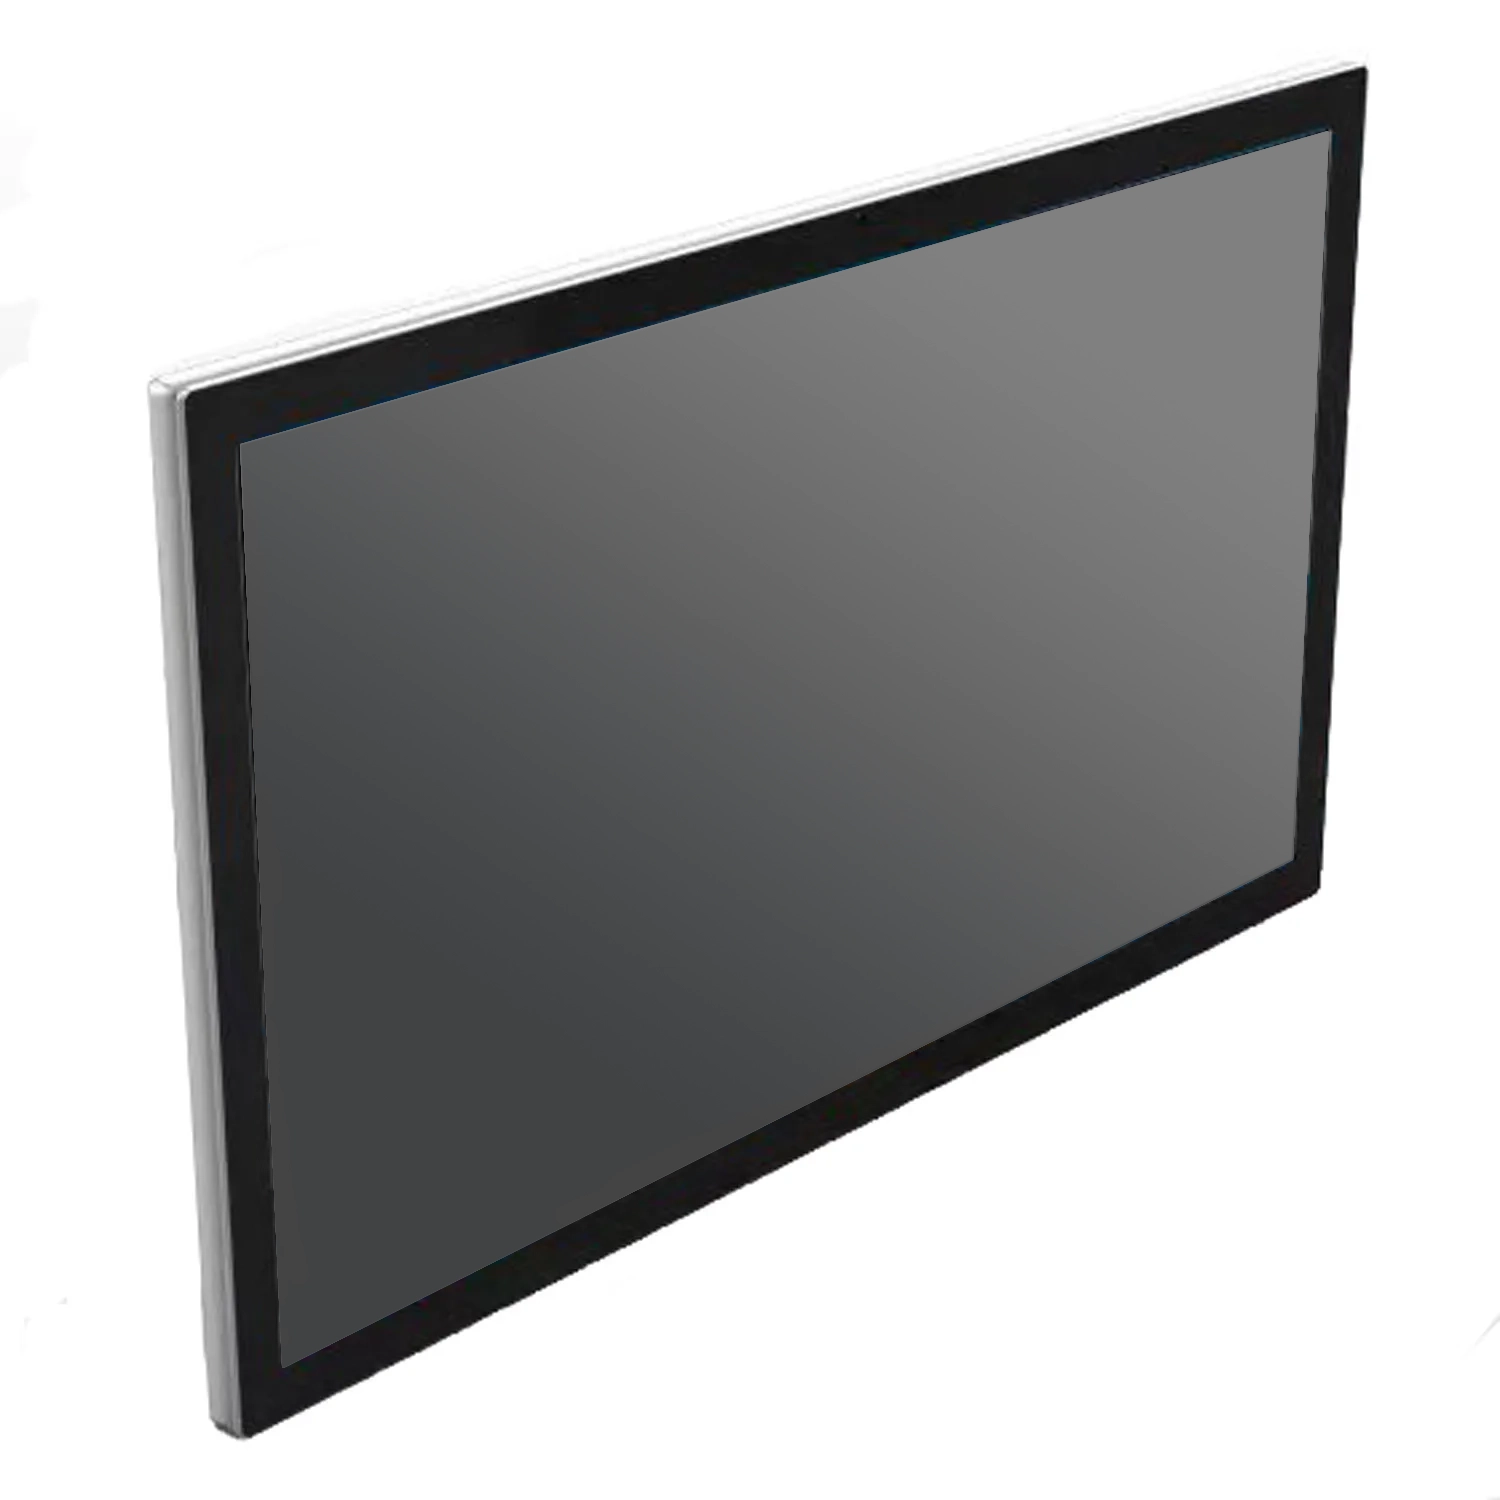 INDUSTRIAL OPEN FRAME NON-TOUCH MONITOR 65" KM-650-NRWS0M1